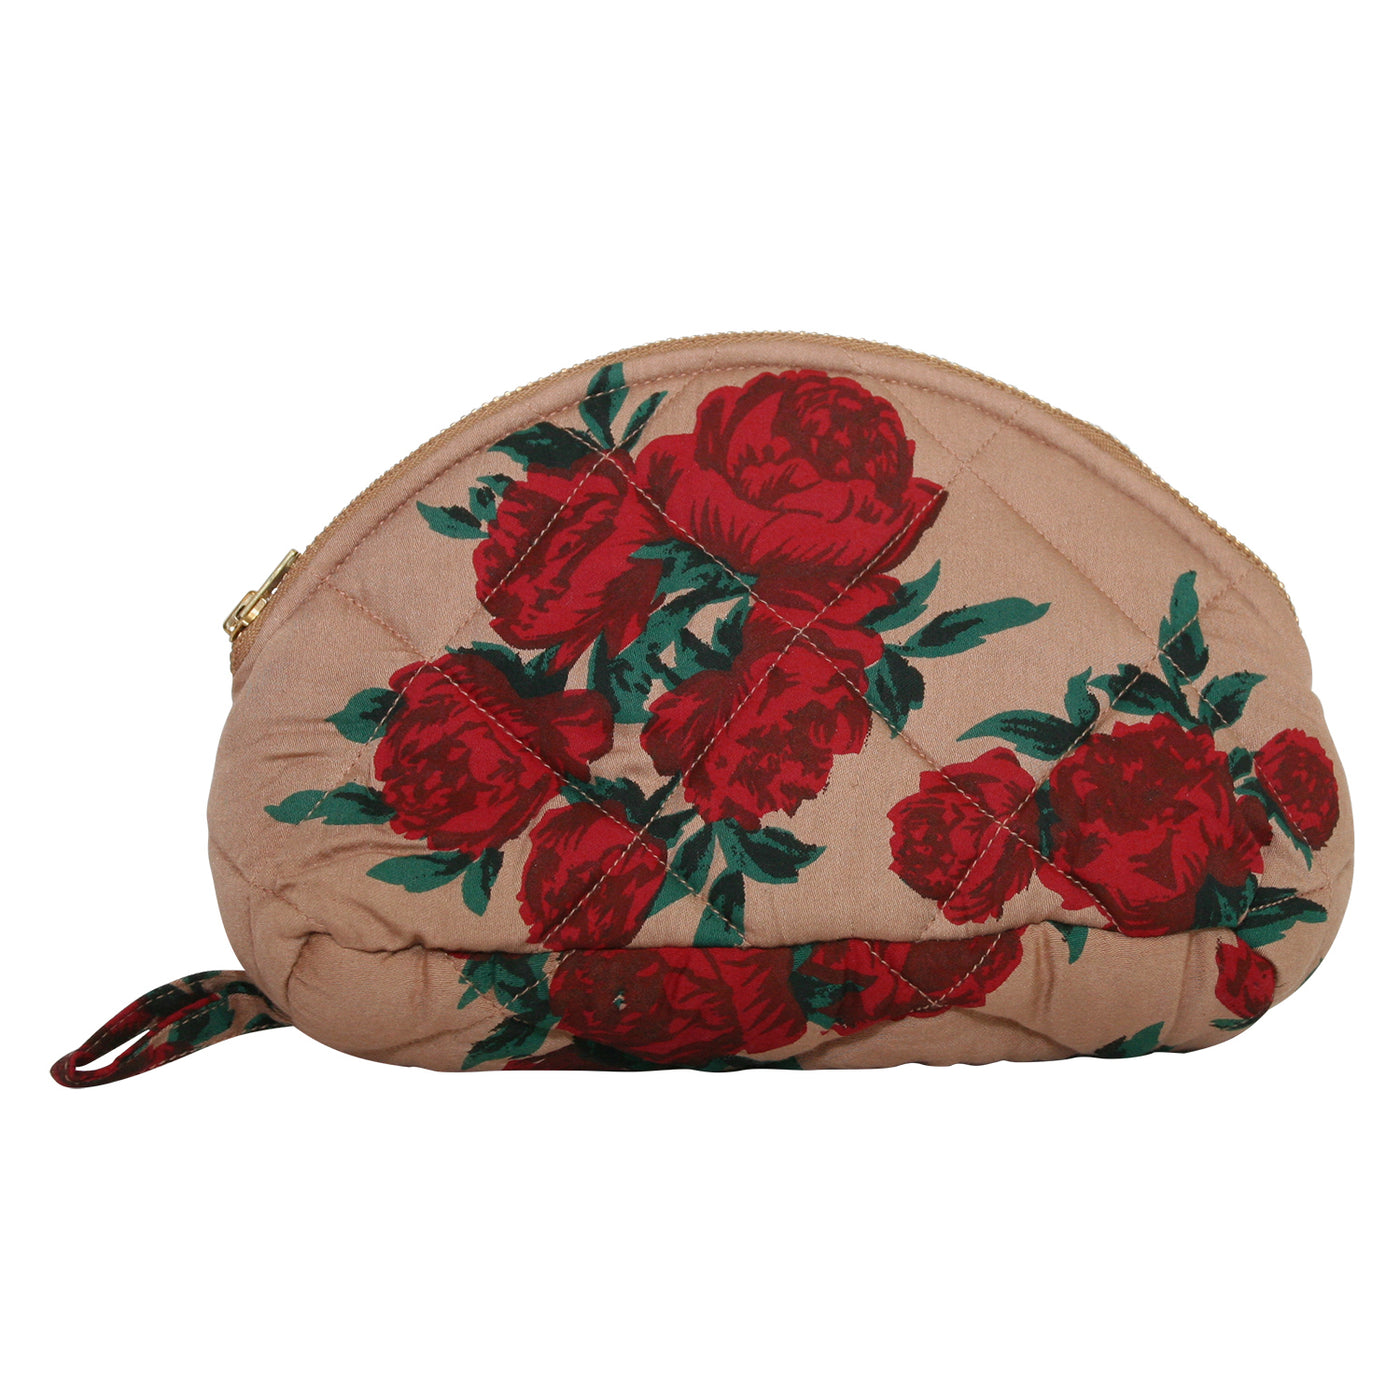 Our Roberta make-up purse is made in quilted lyocell satin. Sustainable accessories